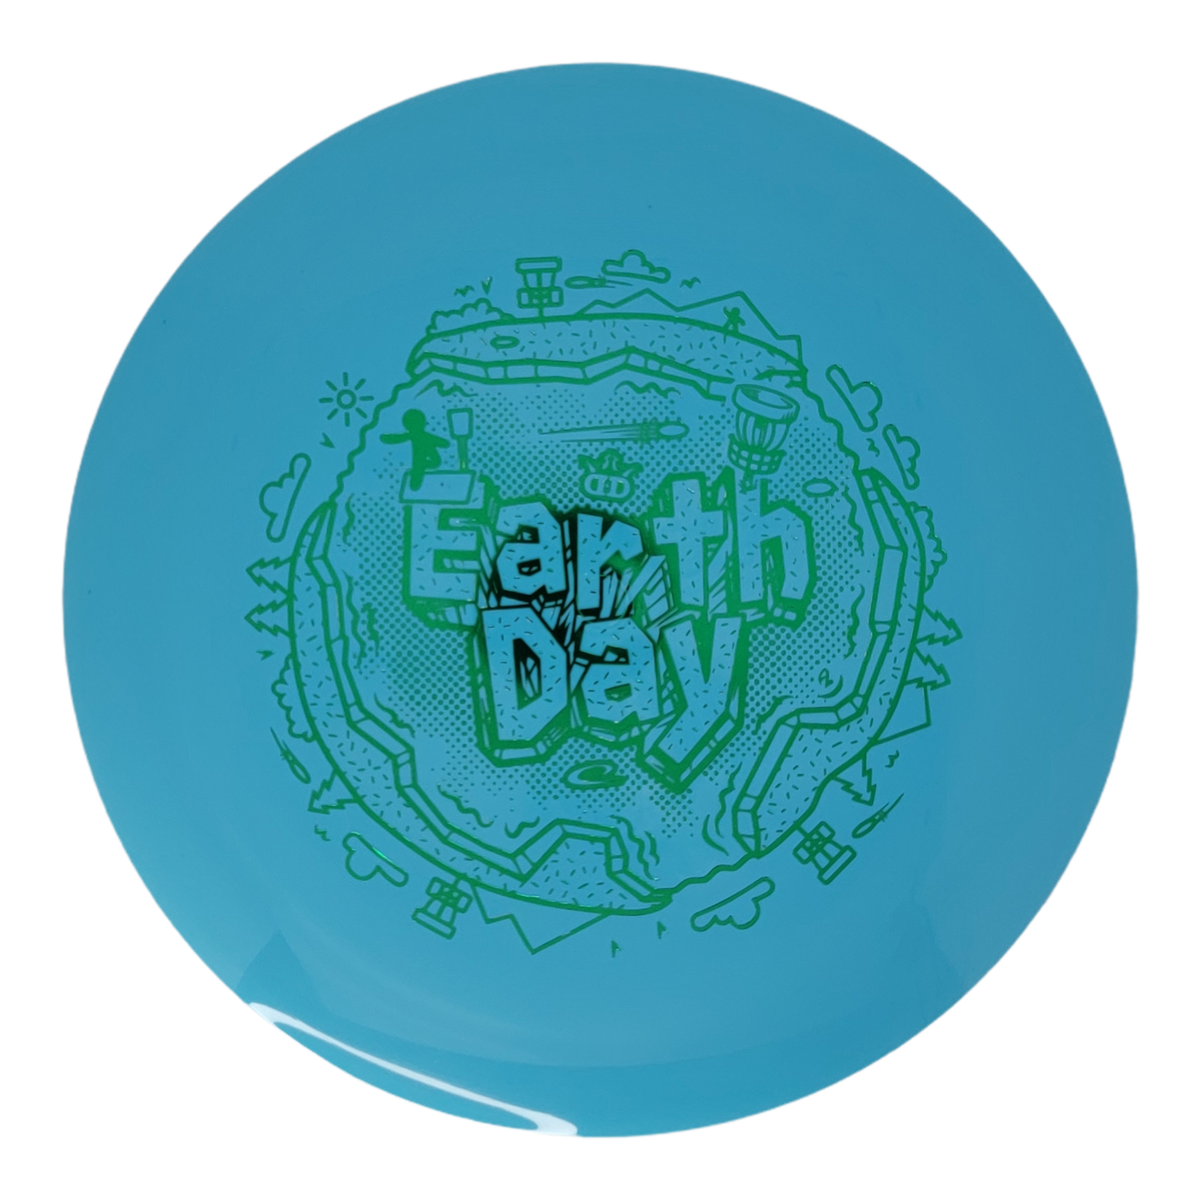 Dynamic Discs BioFuzion Enforcer - Earth Day Stamp